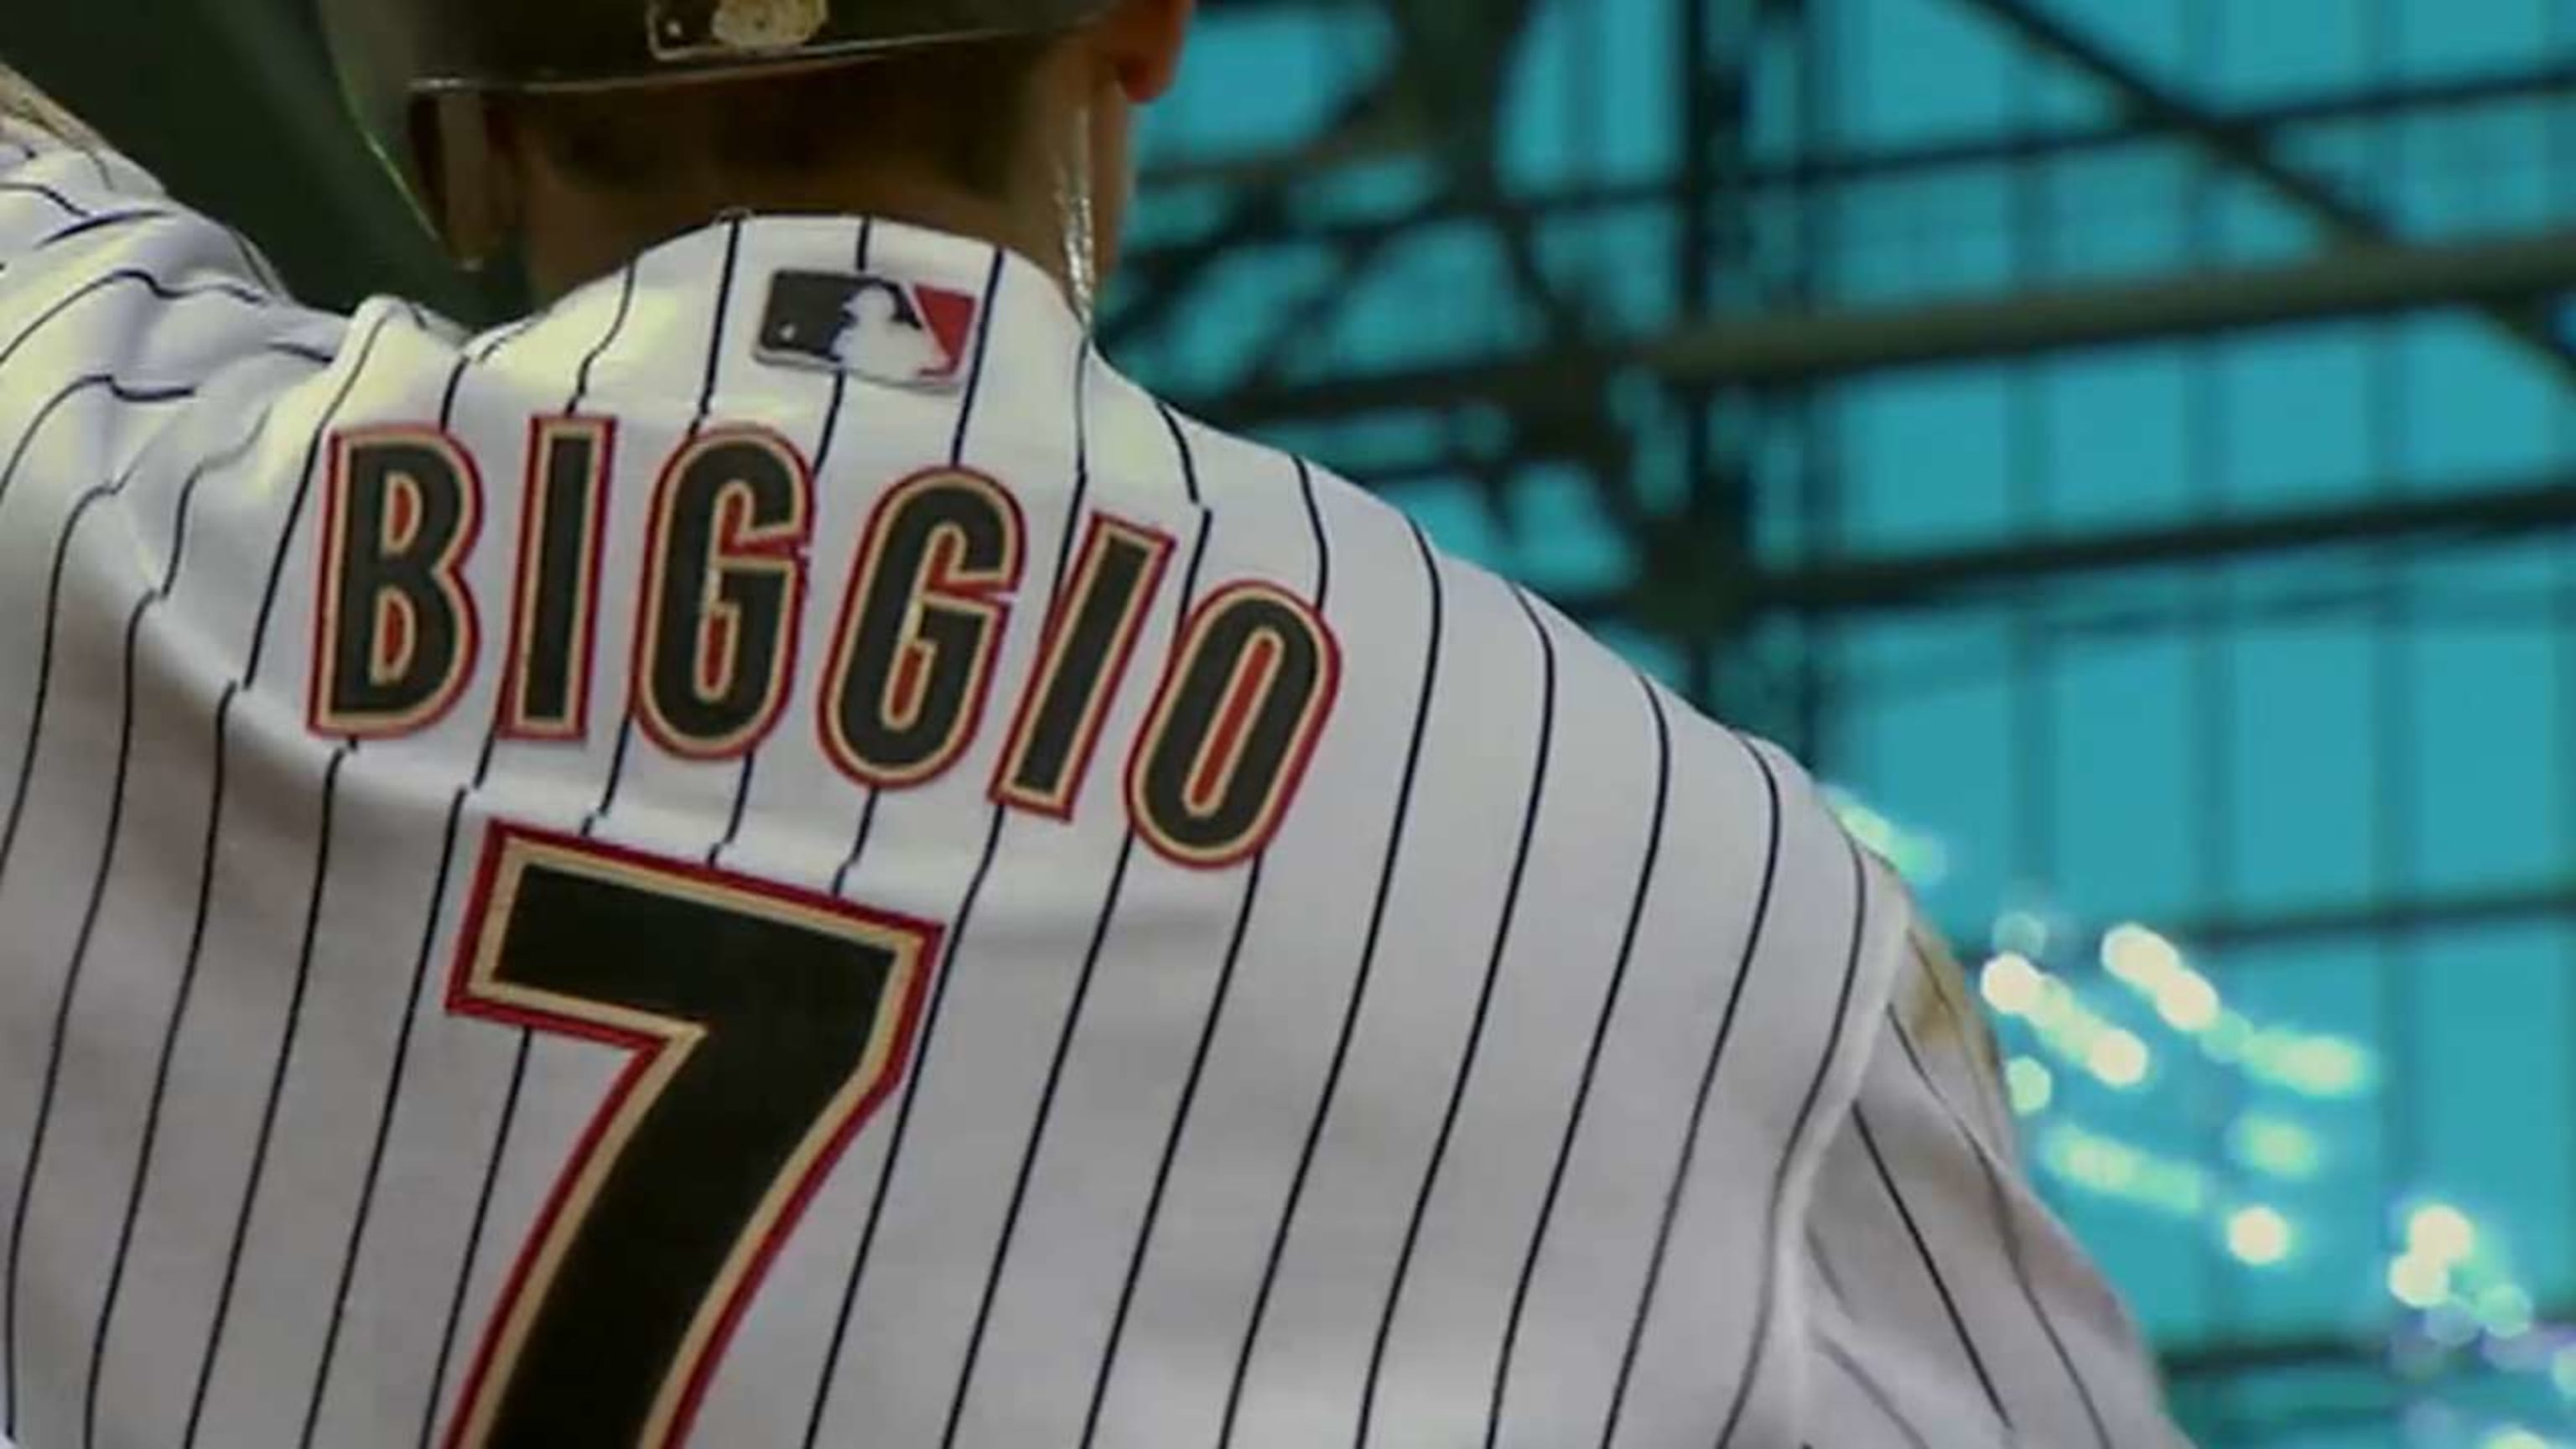 Biggio family begins preparations for induction weekend